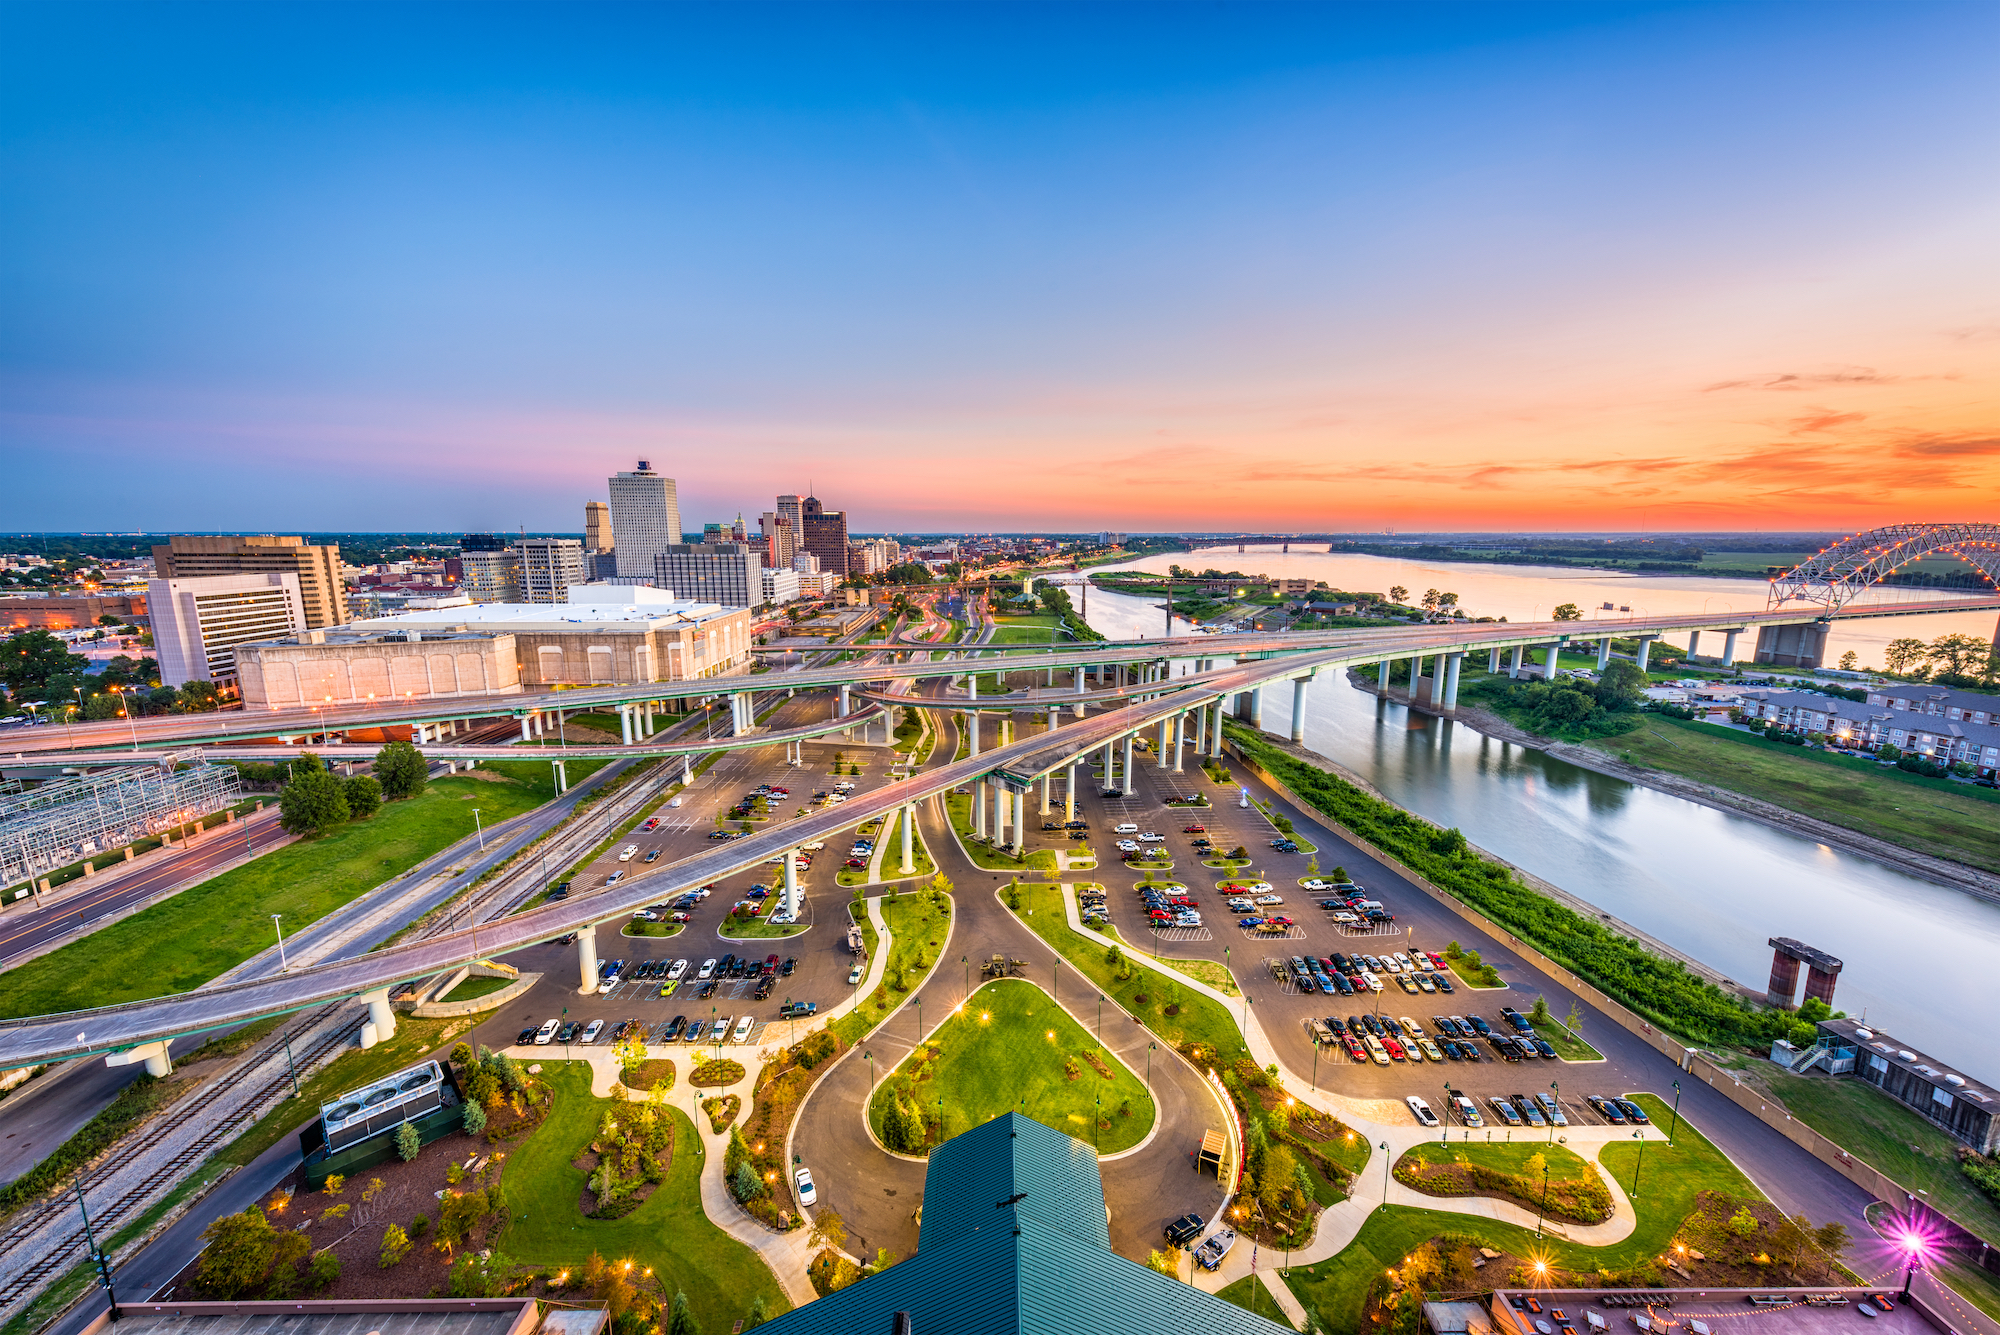 100 Places You Need to Visit in Memphis